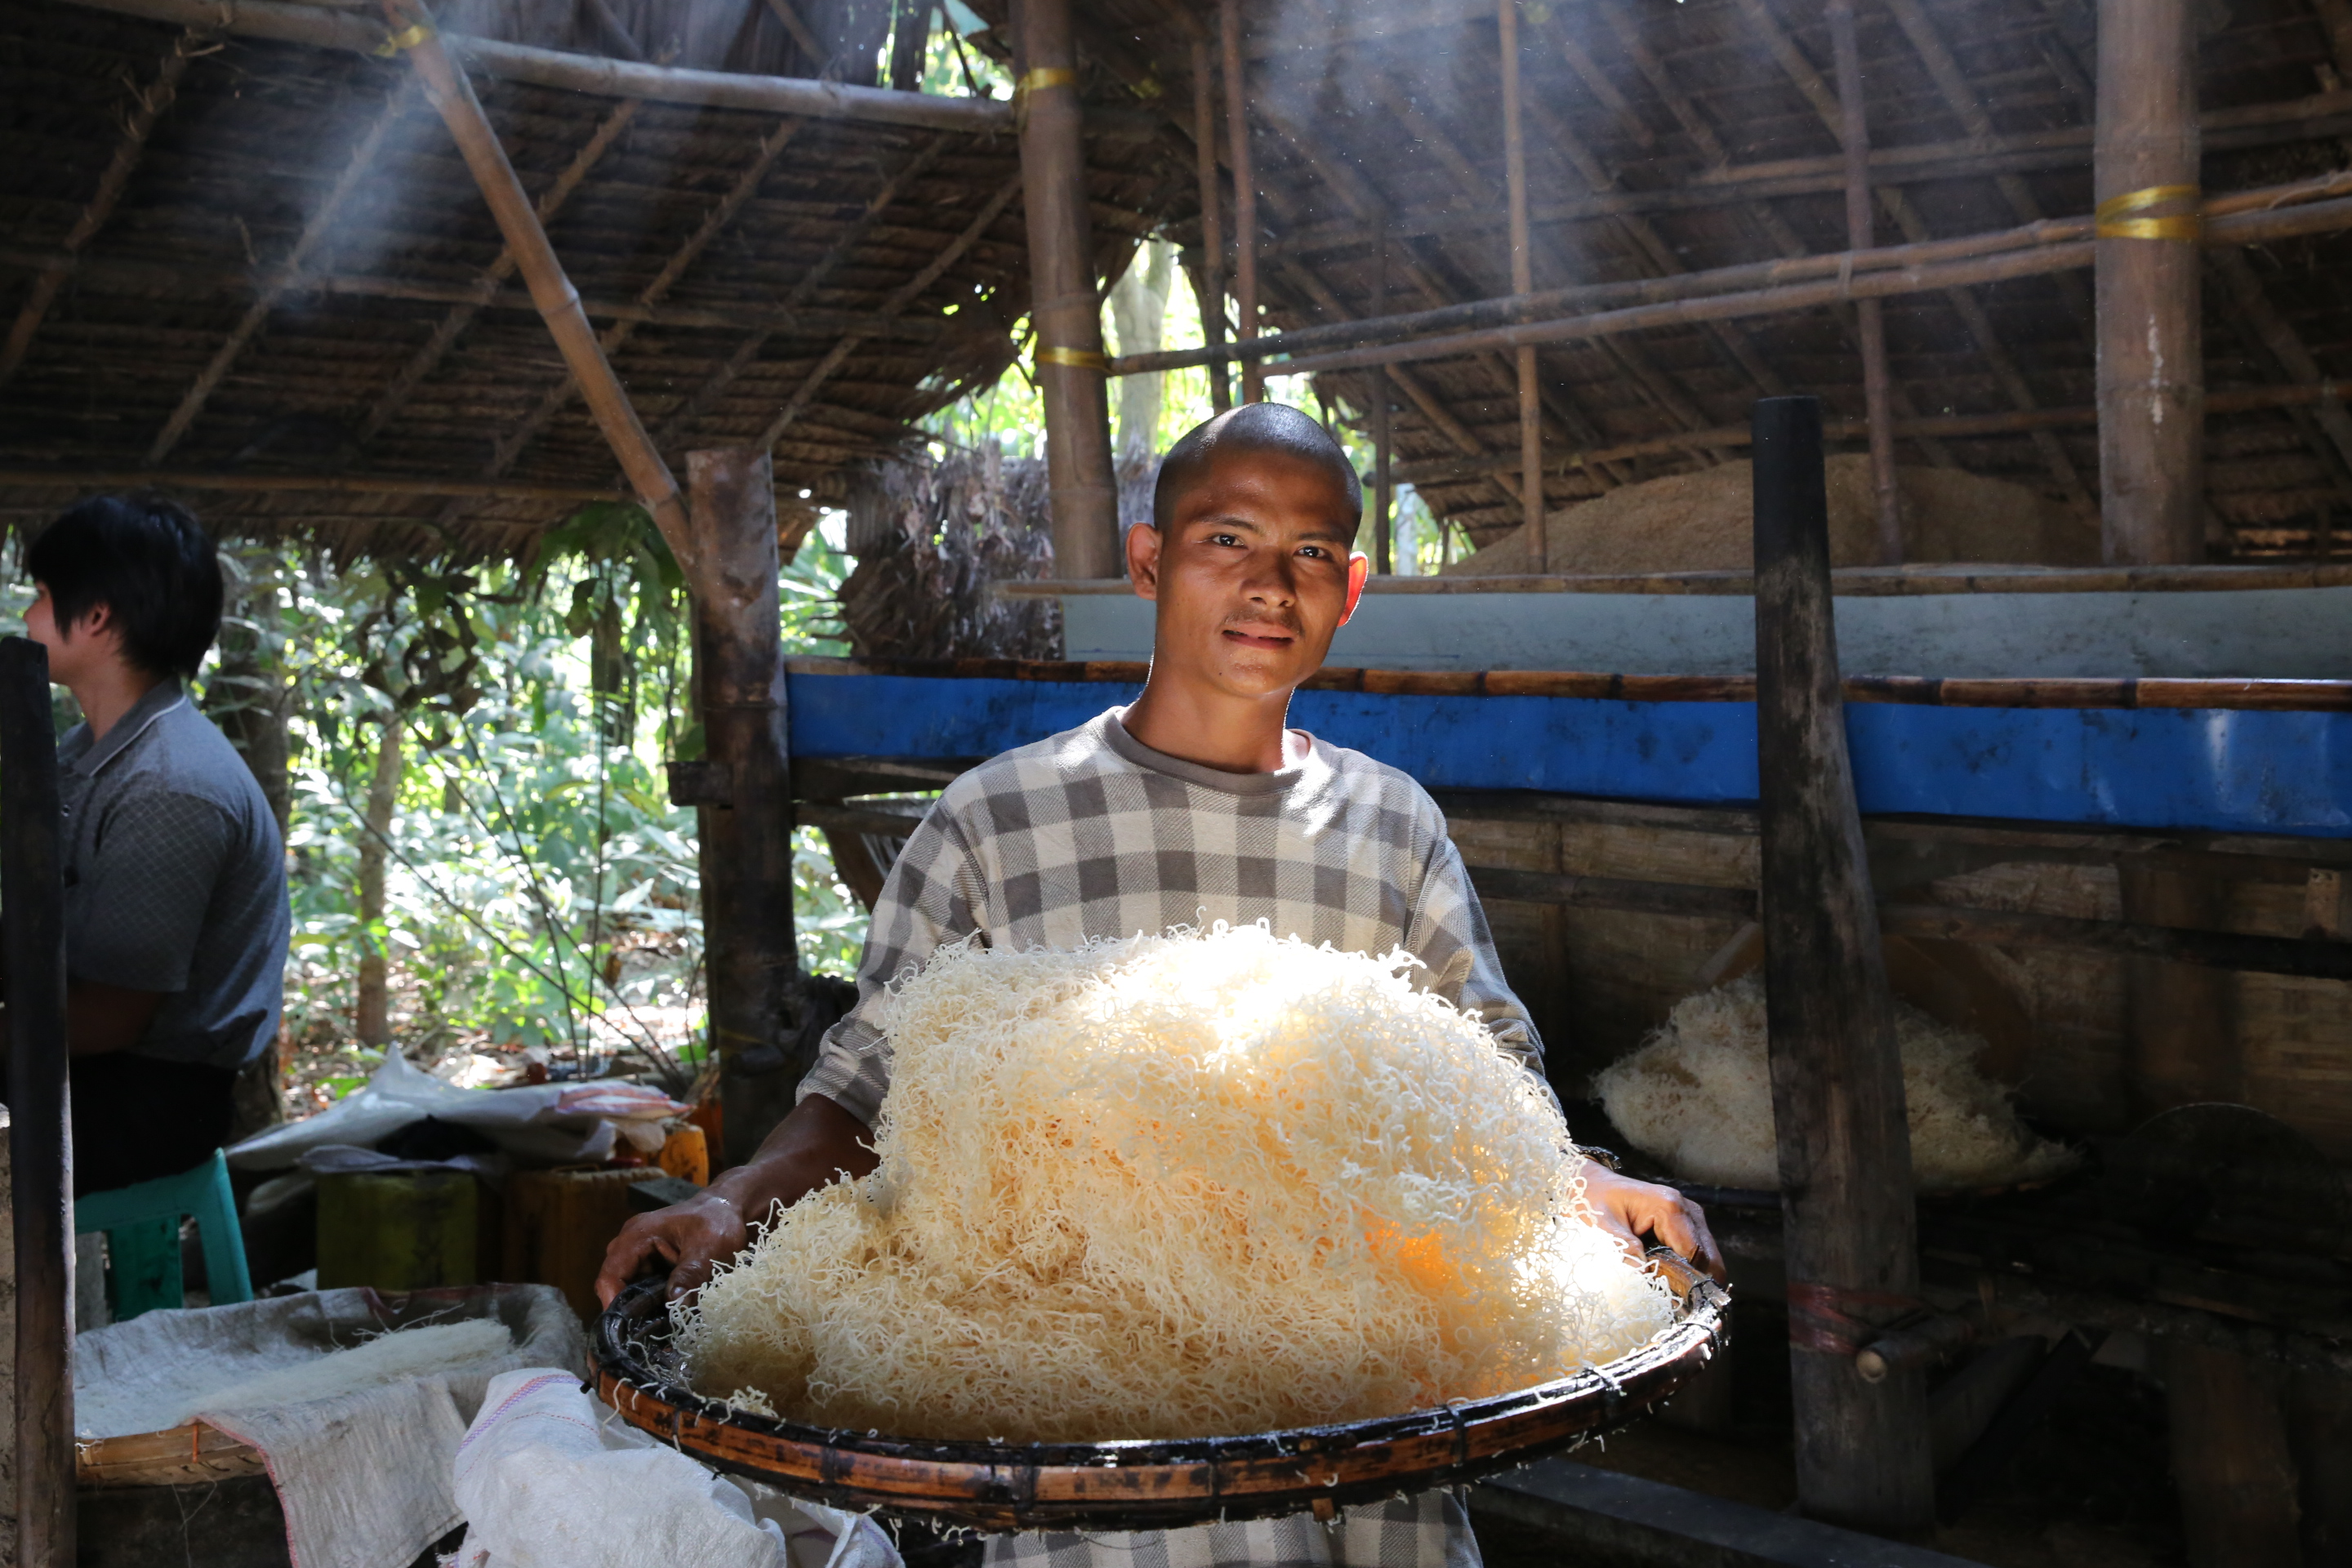 Yar Kode works at the noodle snack factory started in Myanmar by Win Win Soe with the help of a microfinance loan. Such loans can help stimulate local economies in emerging markets.